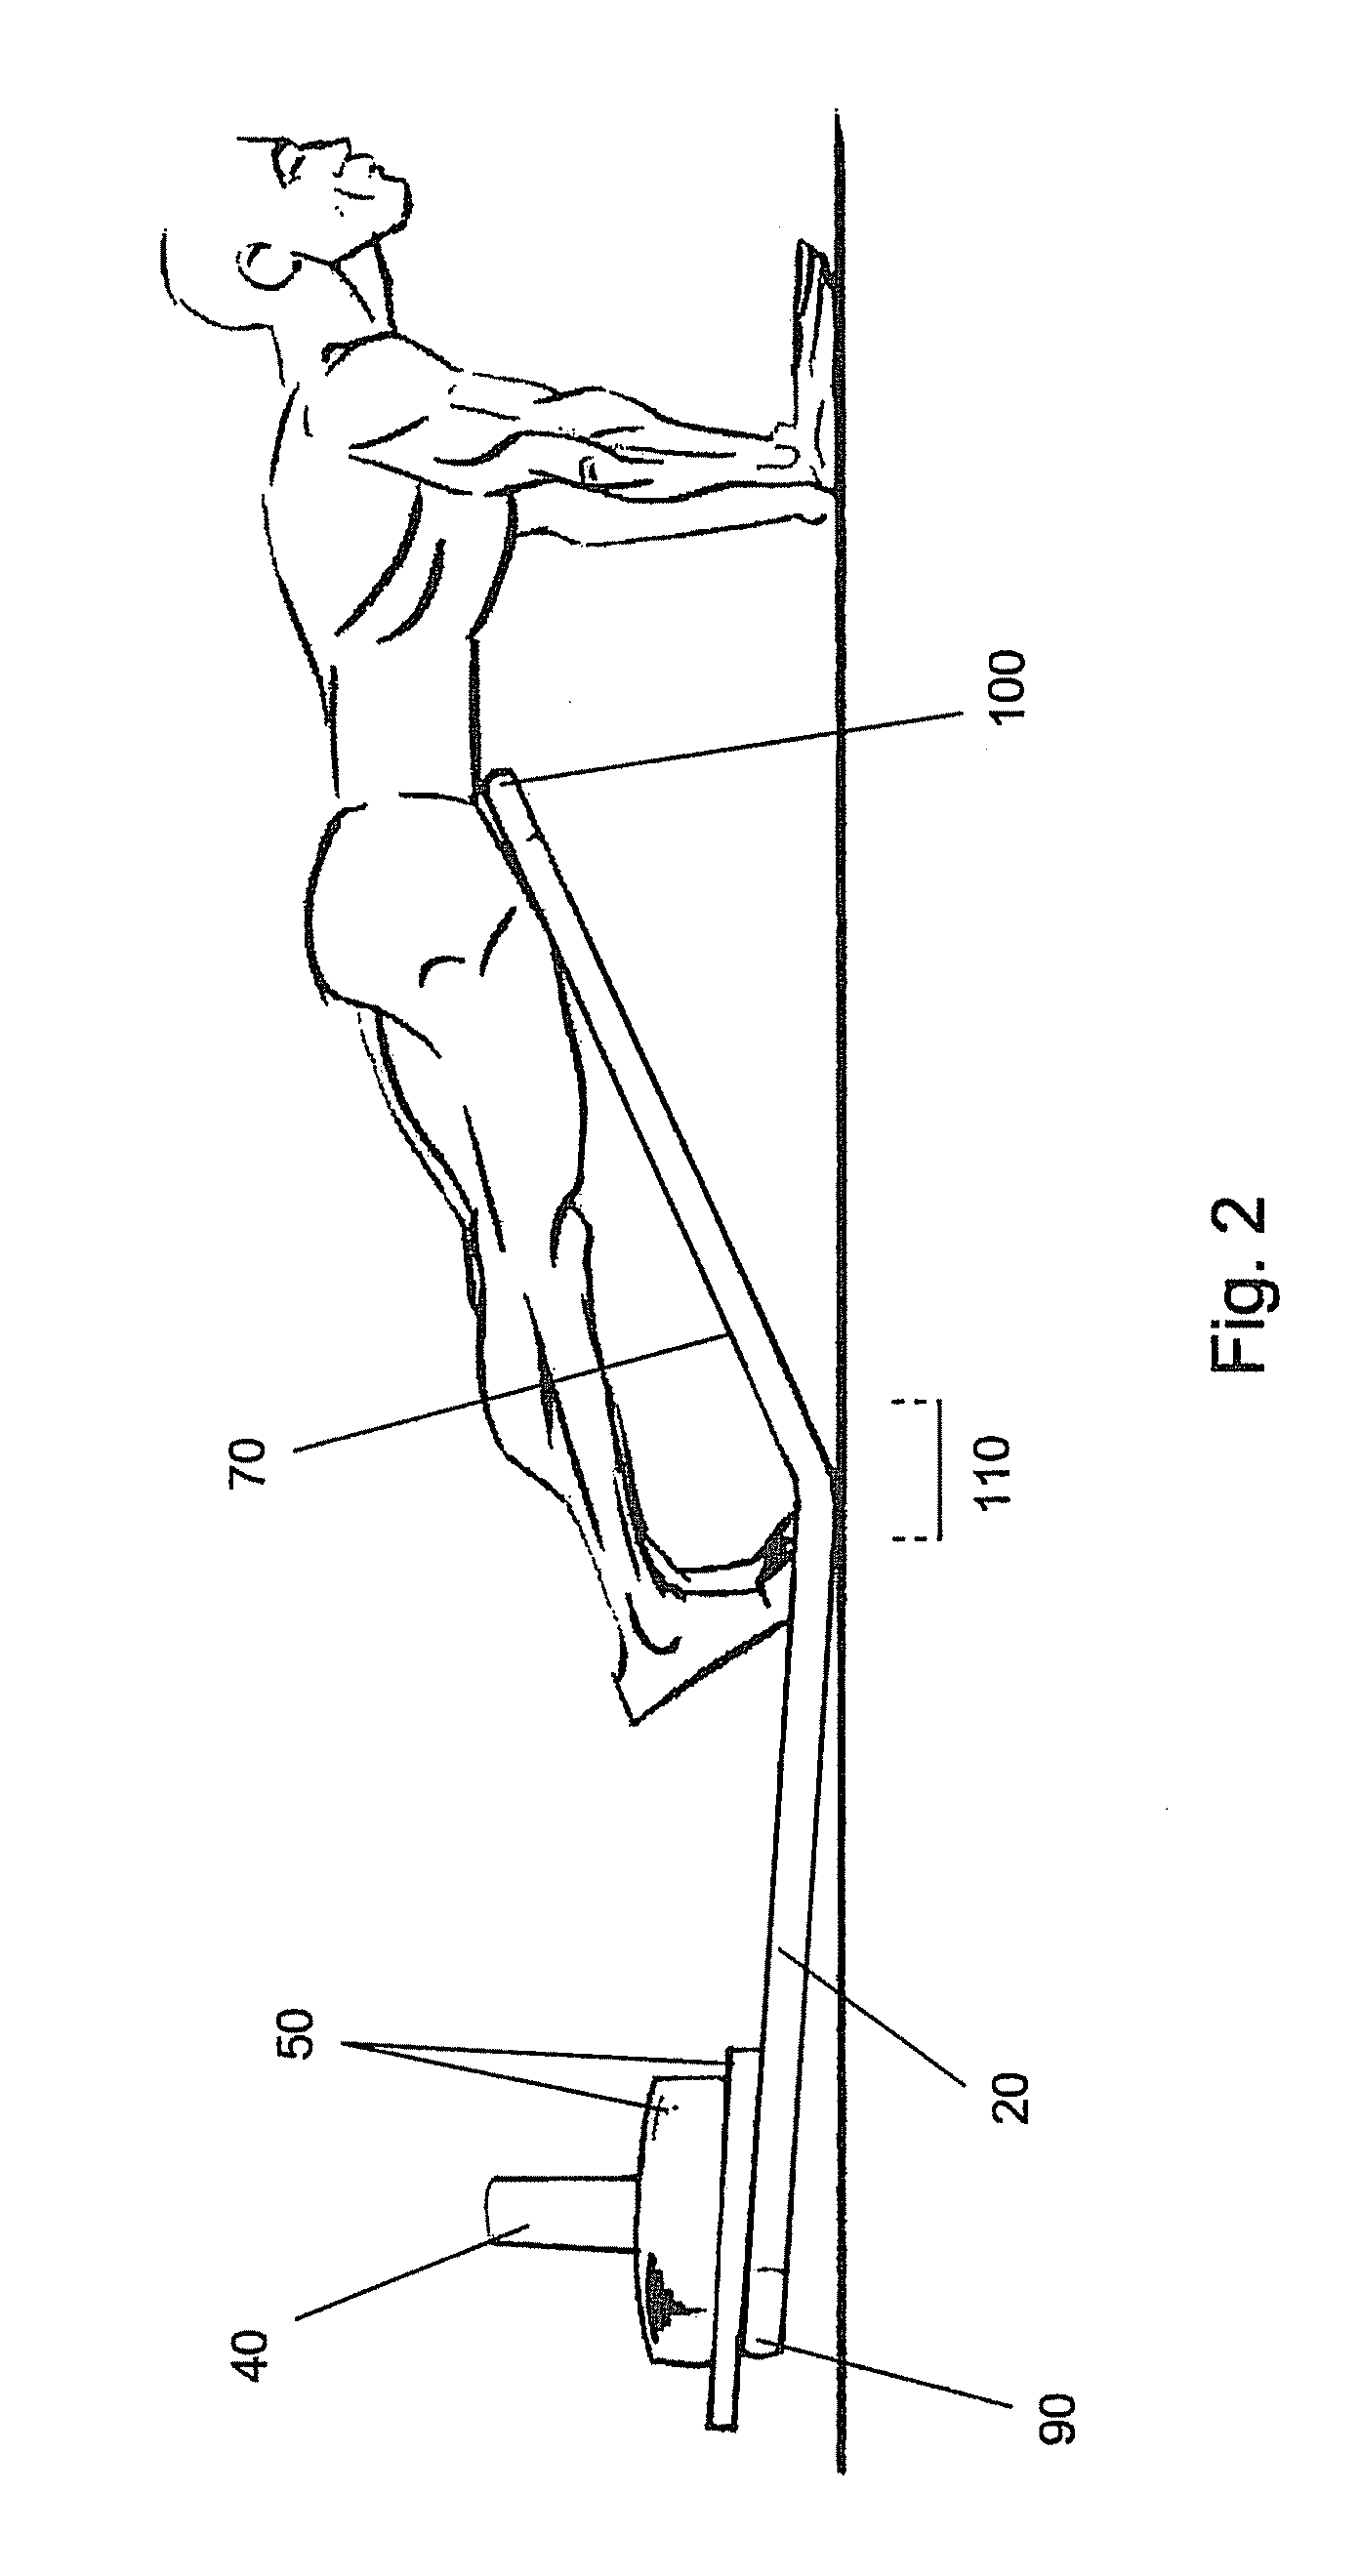 Assisted-exercise apparatus